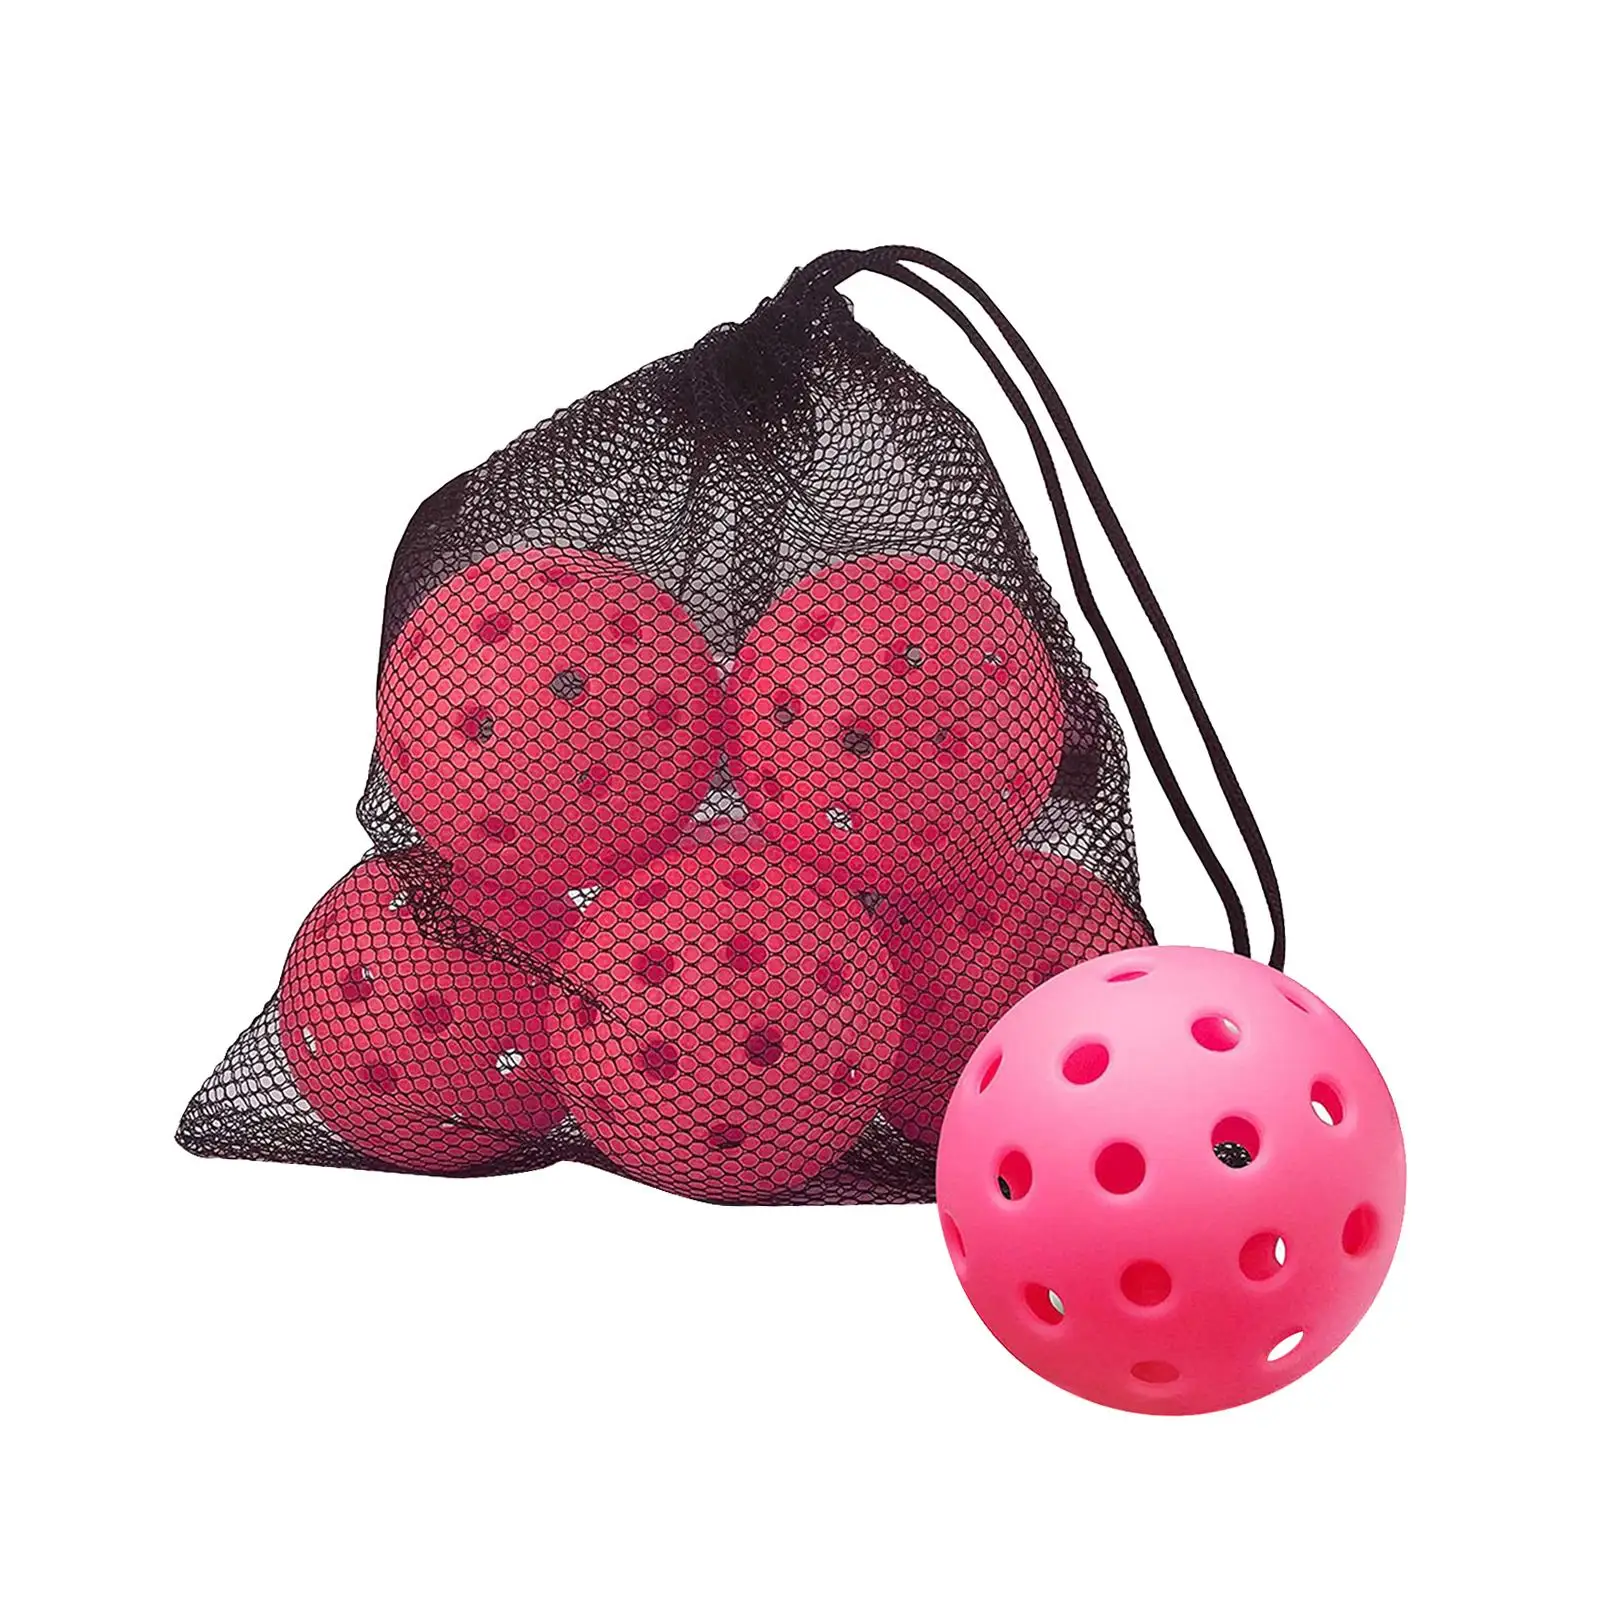 6Pcs Pickleball Balls Pickleball Practice Balls for for All Style Pickleball Paddles Indoor Indoor Game Professional Players